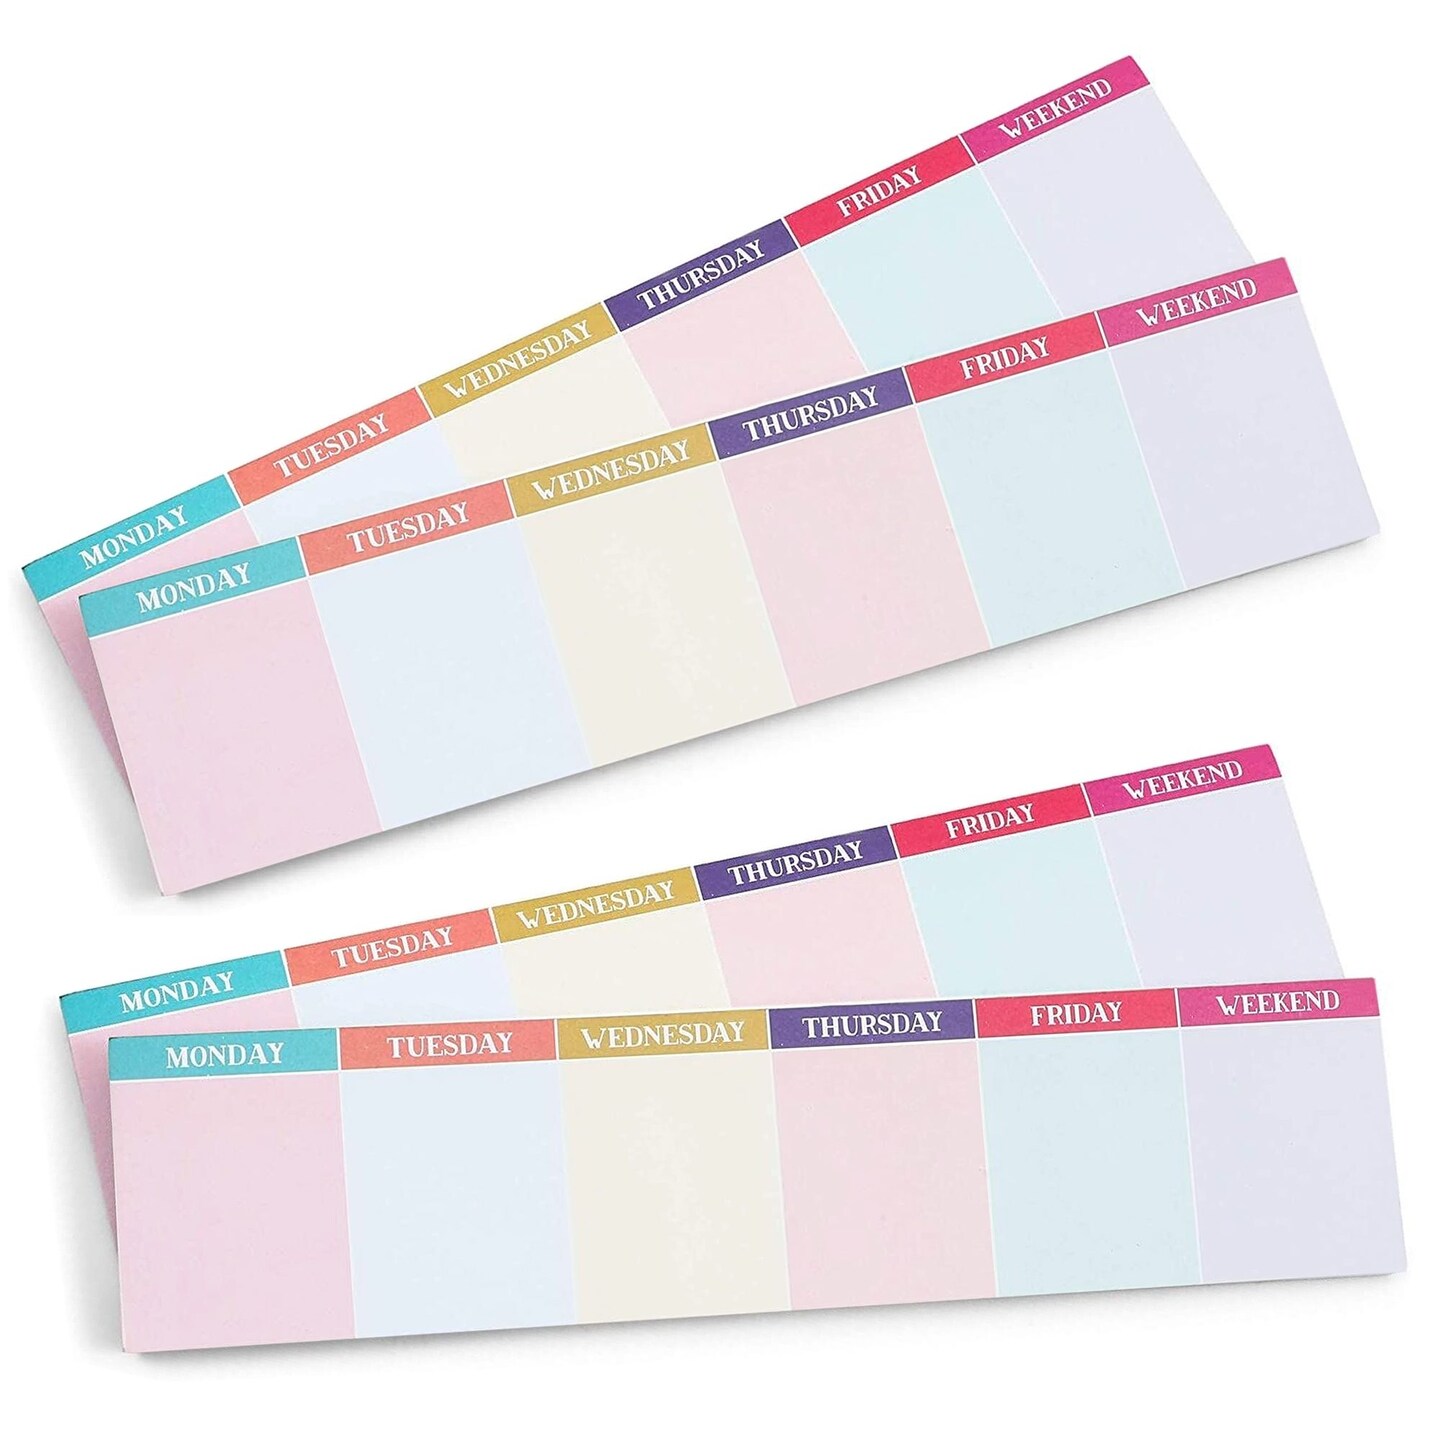 2 Pack Weekly Planner Sticky Notes, Calendar Note Pad for Tasks, To-Do Lists, School and Office Supplies (11.8 x 2.75 In)